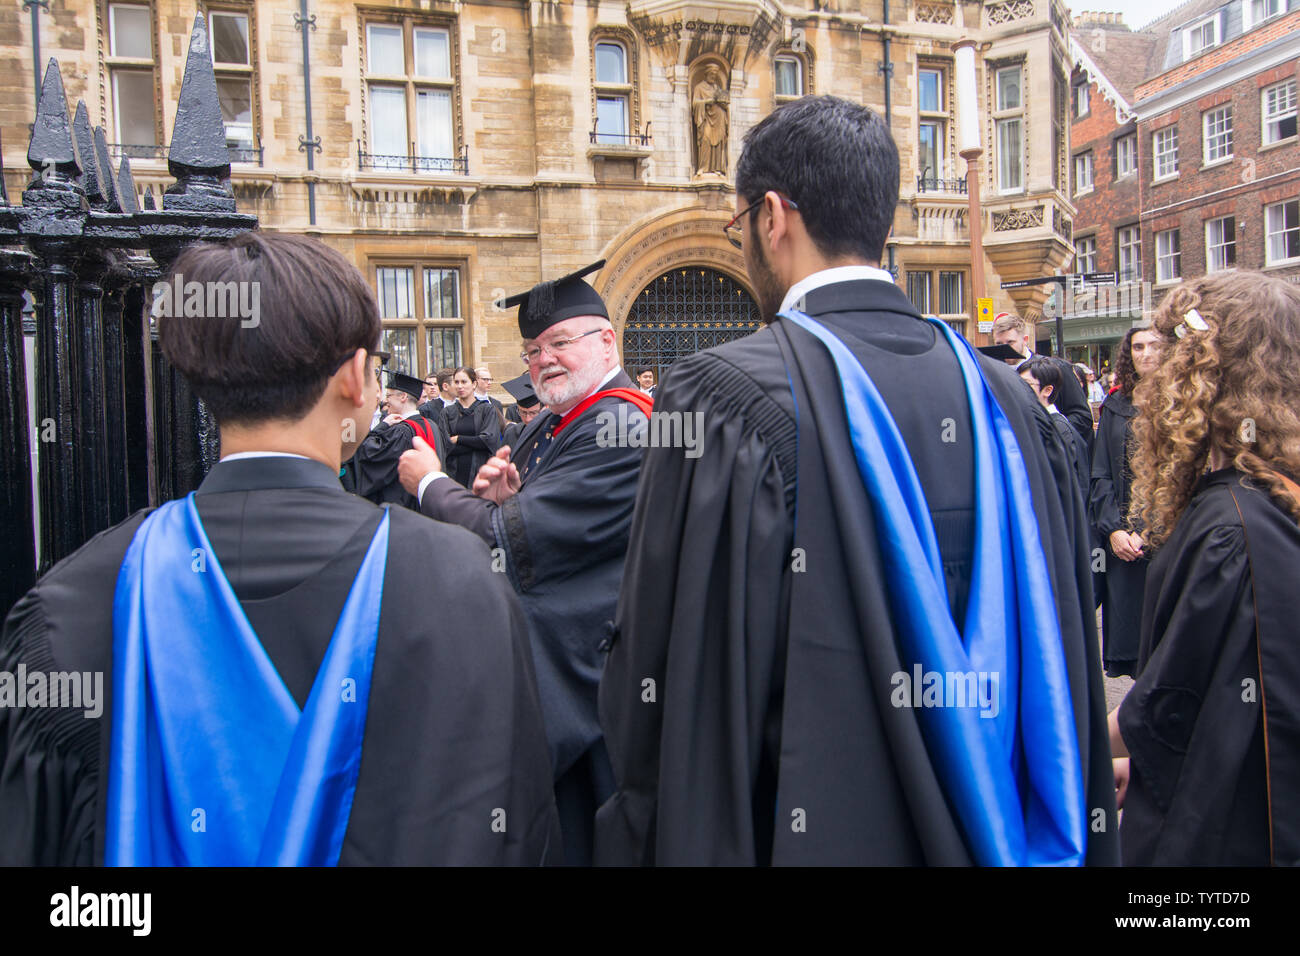 colour of graduation gowns has a meaning sybolizing something pale blue education and scarlet theology TYTD7D